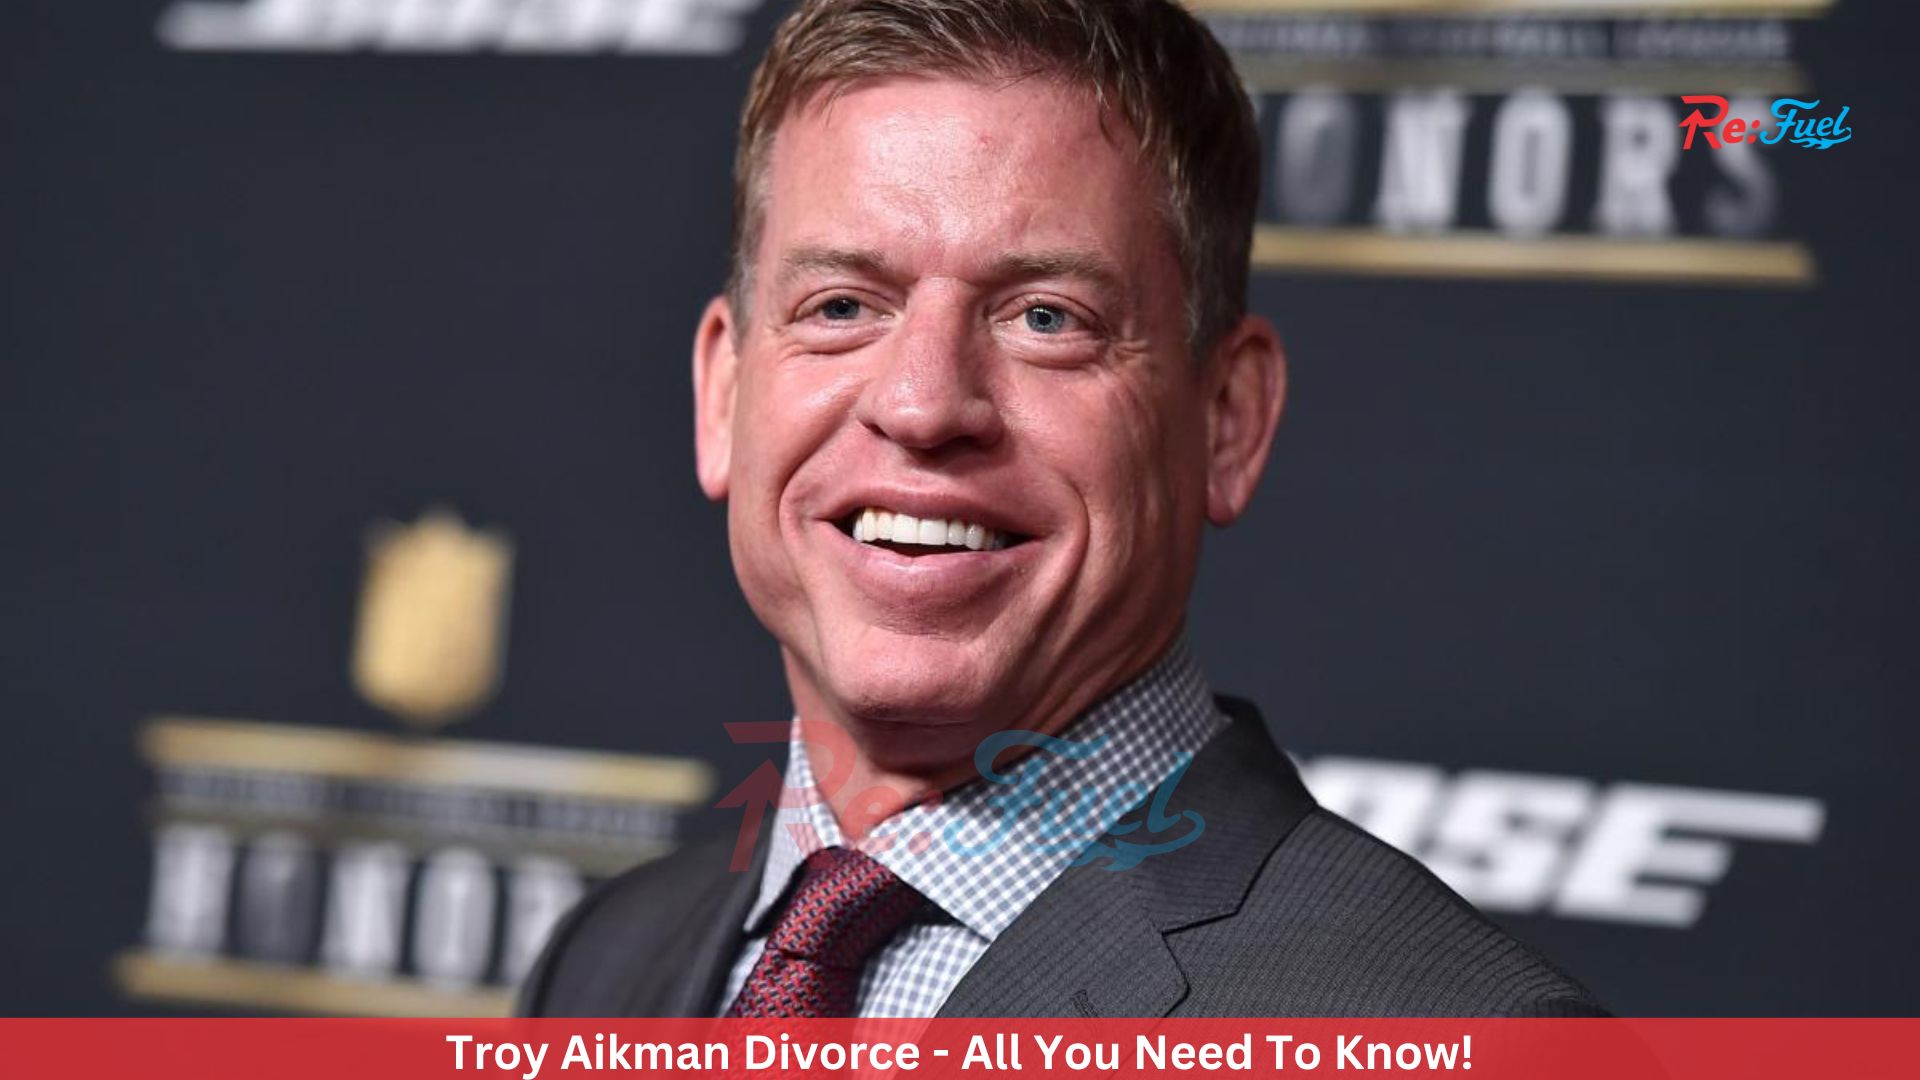 Troy Aikman Divorce - All You Need To Know!